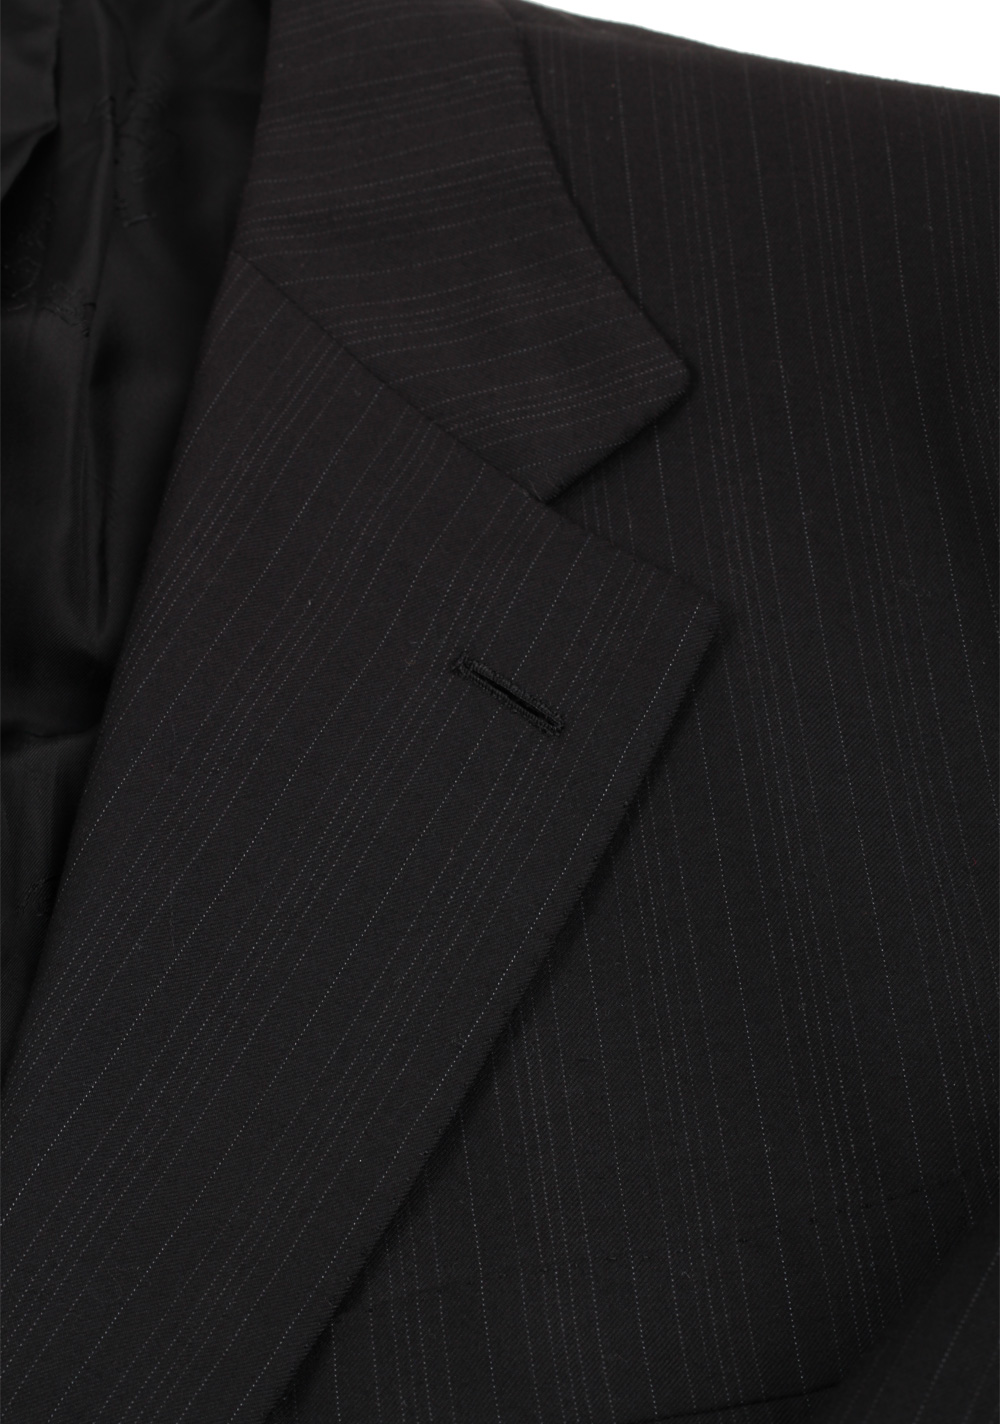 Brioni Colosseo Charcoal Suit Size 50 / 40R U.S. In Wool Super 200s | Costume Limité